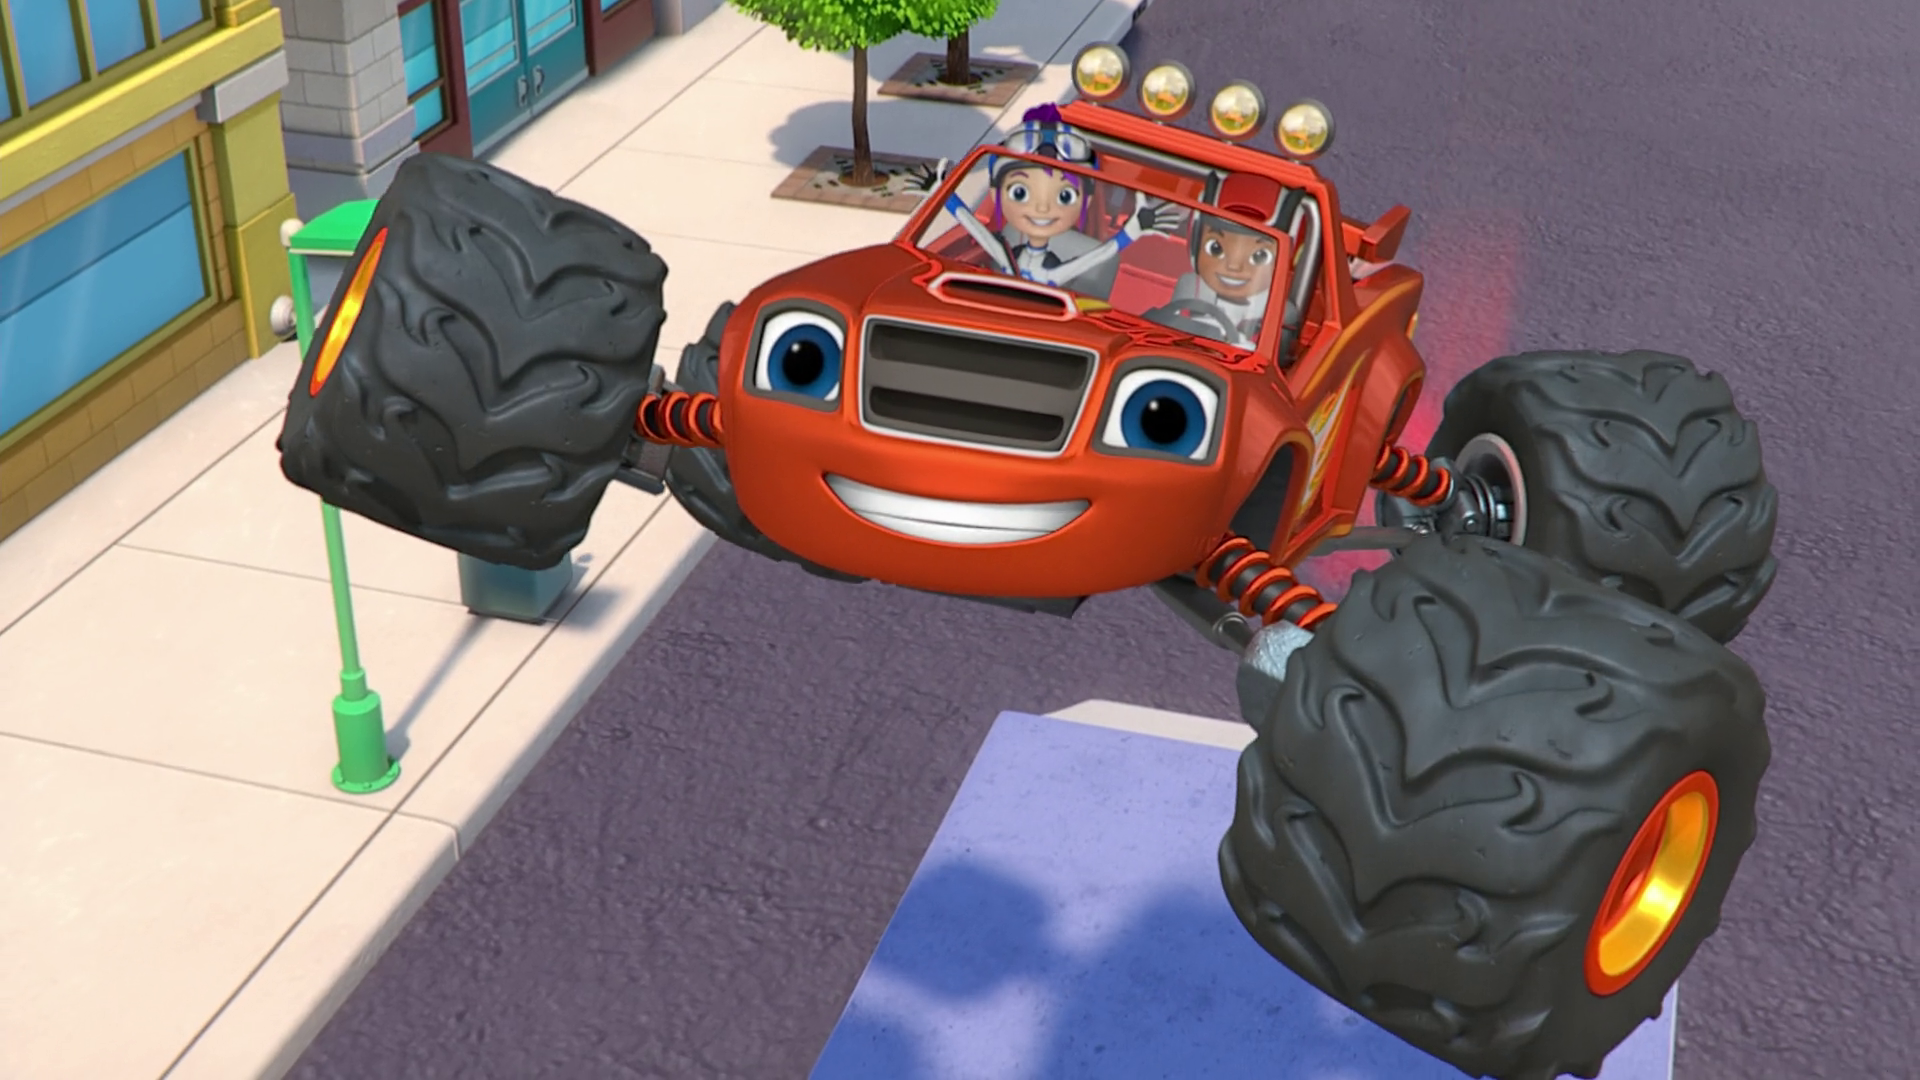 Need for Blazing Speed/Gallery | Blaze and the Monster Machines Wiki | FANDOM powered by Wikia